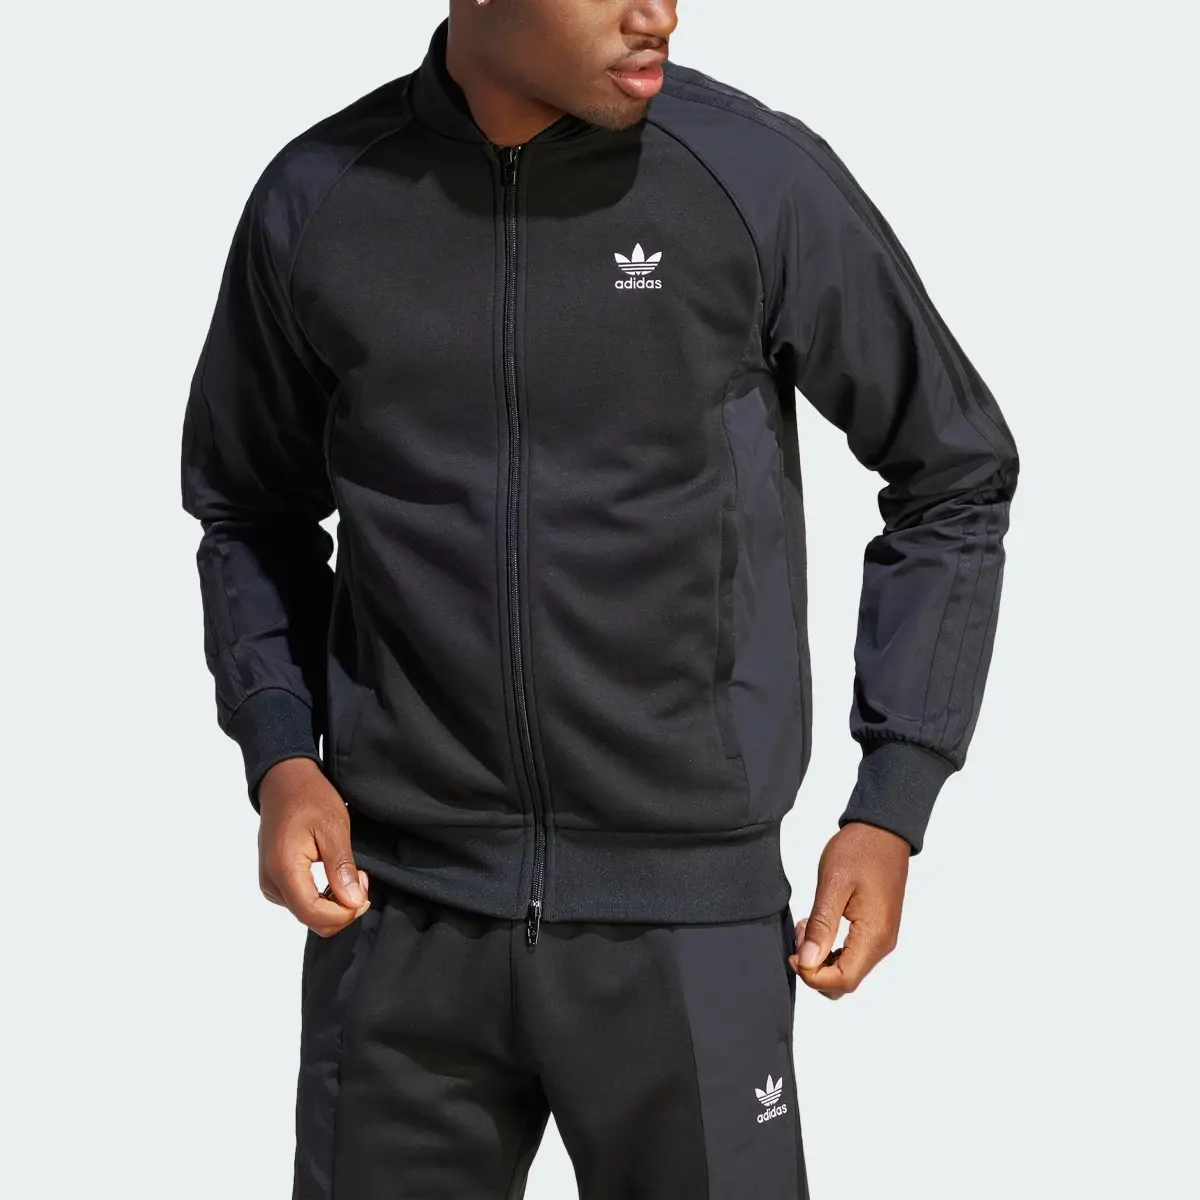 Adidas Track jacket adicolor Re-Pro SST Material Mix. 1